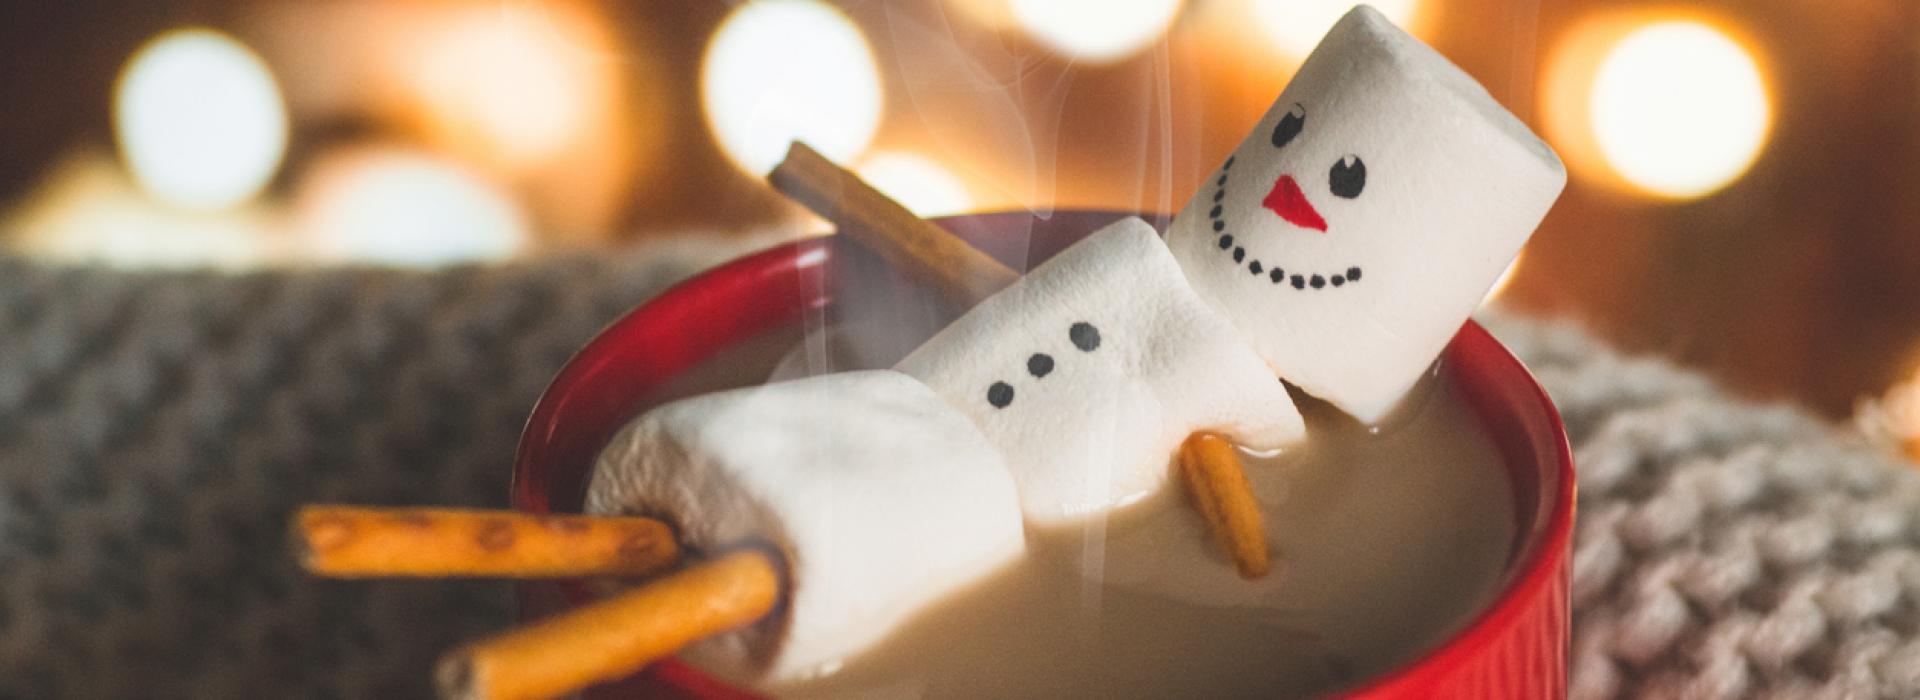 In this cozy winter photo, a stick figure made from marshmallows and cinnamon sticks appears to be relaxing in a pool (cup) of hot chocolate. A bright red mug and white lights in the background complete a holiday feel.